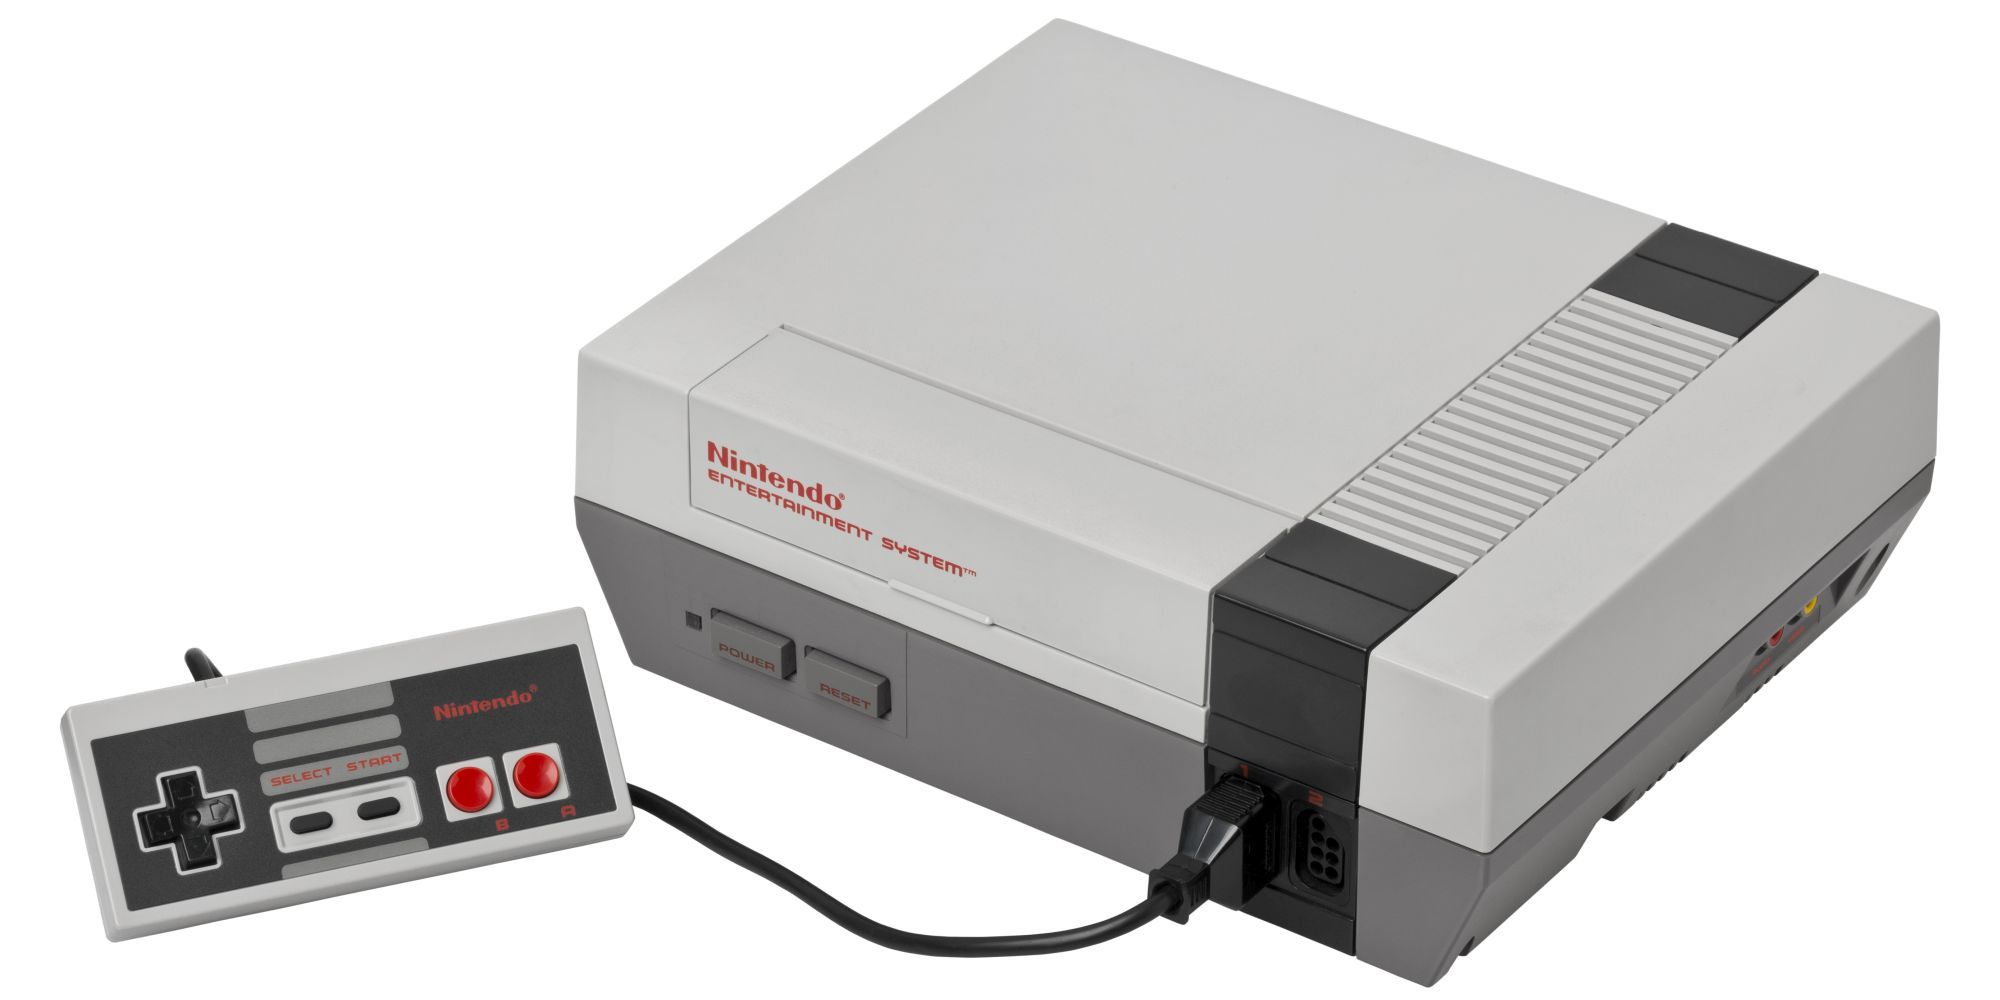 A Nintendo Entertainment System with controller attached